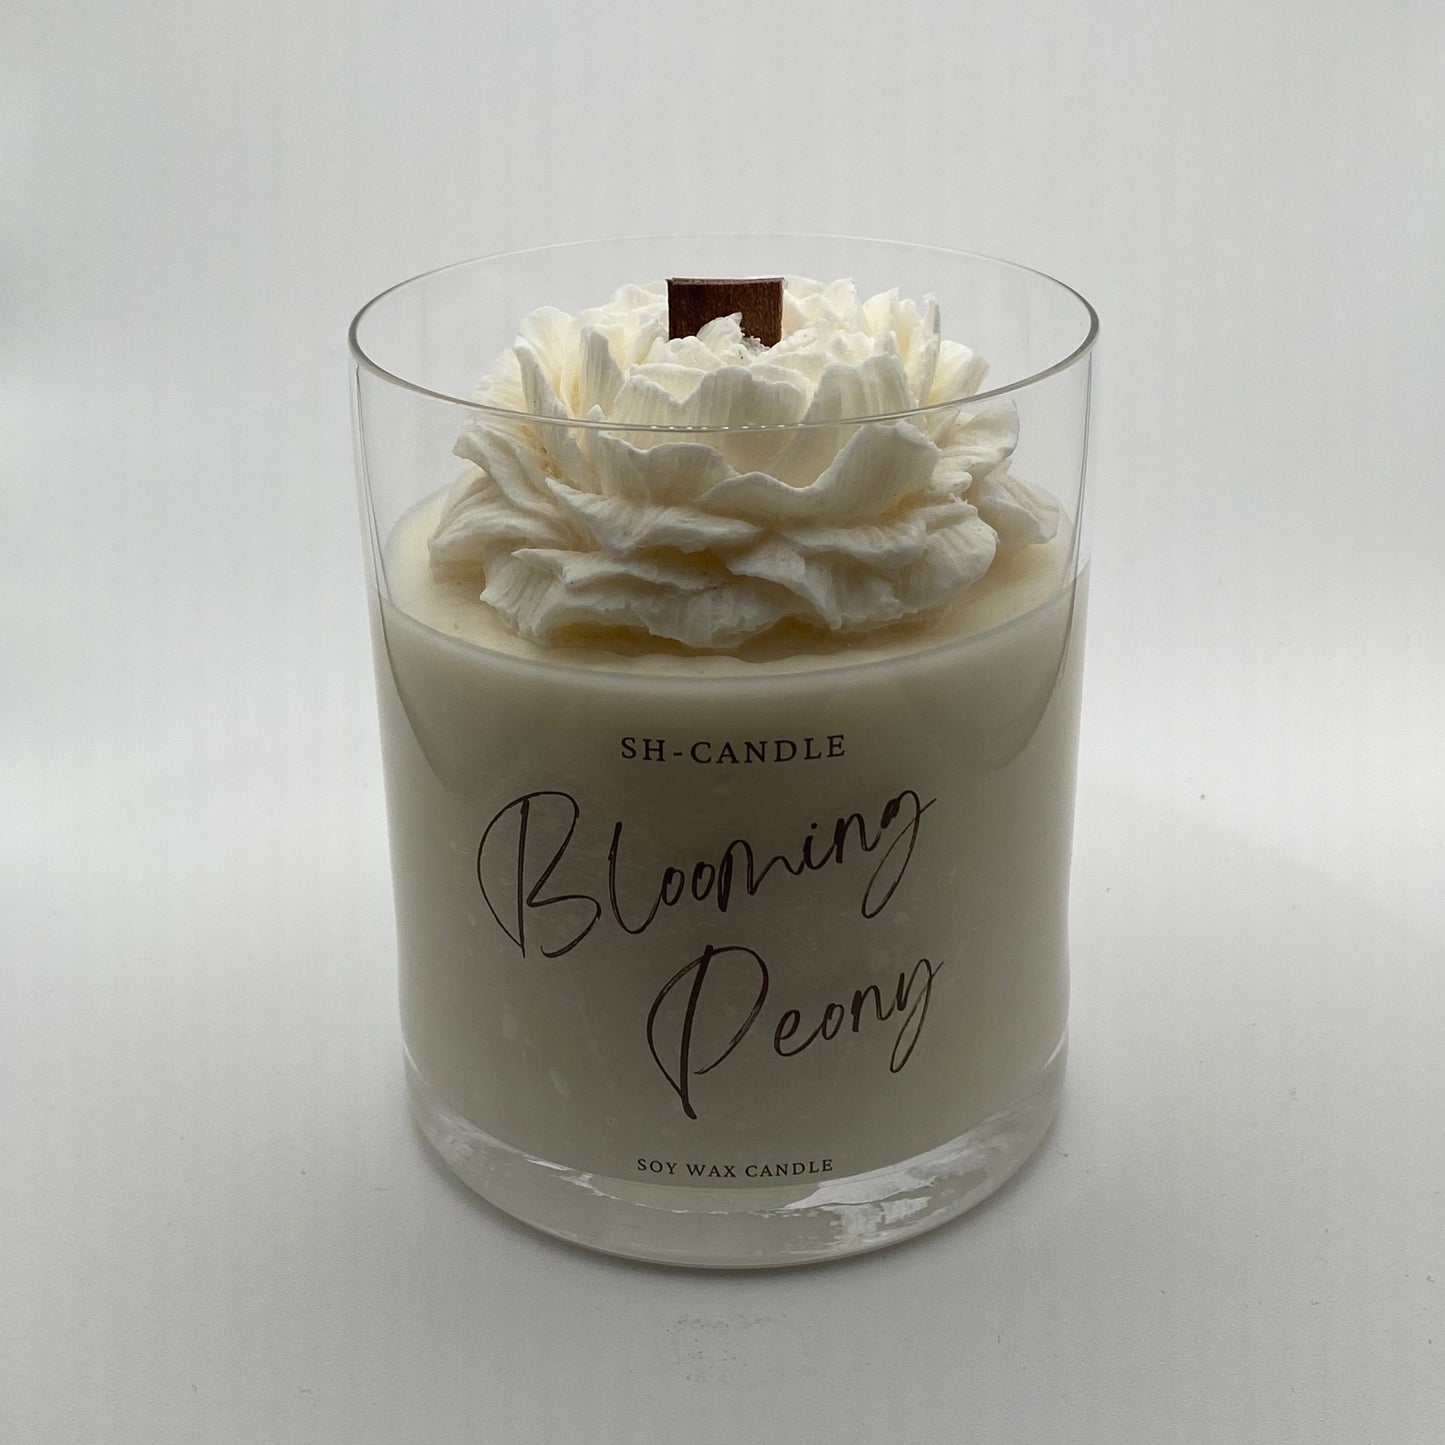 Blooming Peony Holzdocht - SH-CANDLE